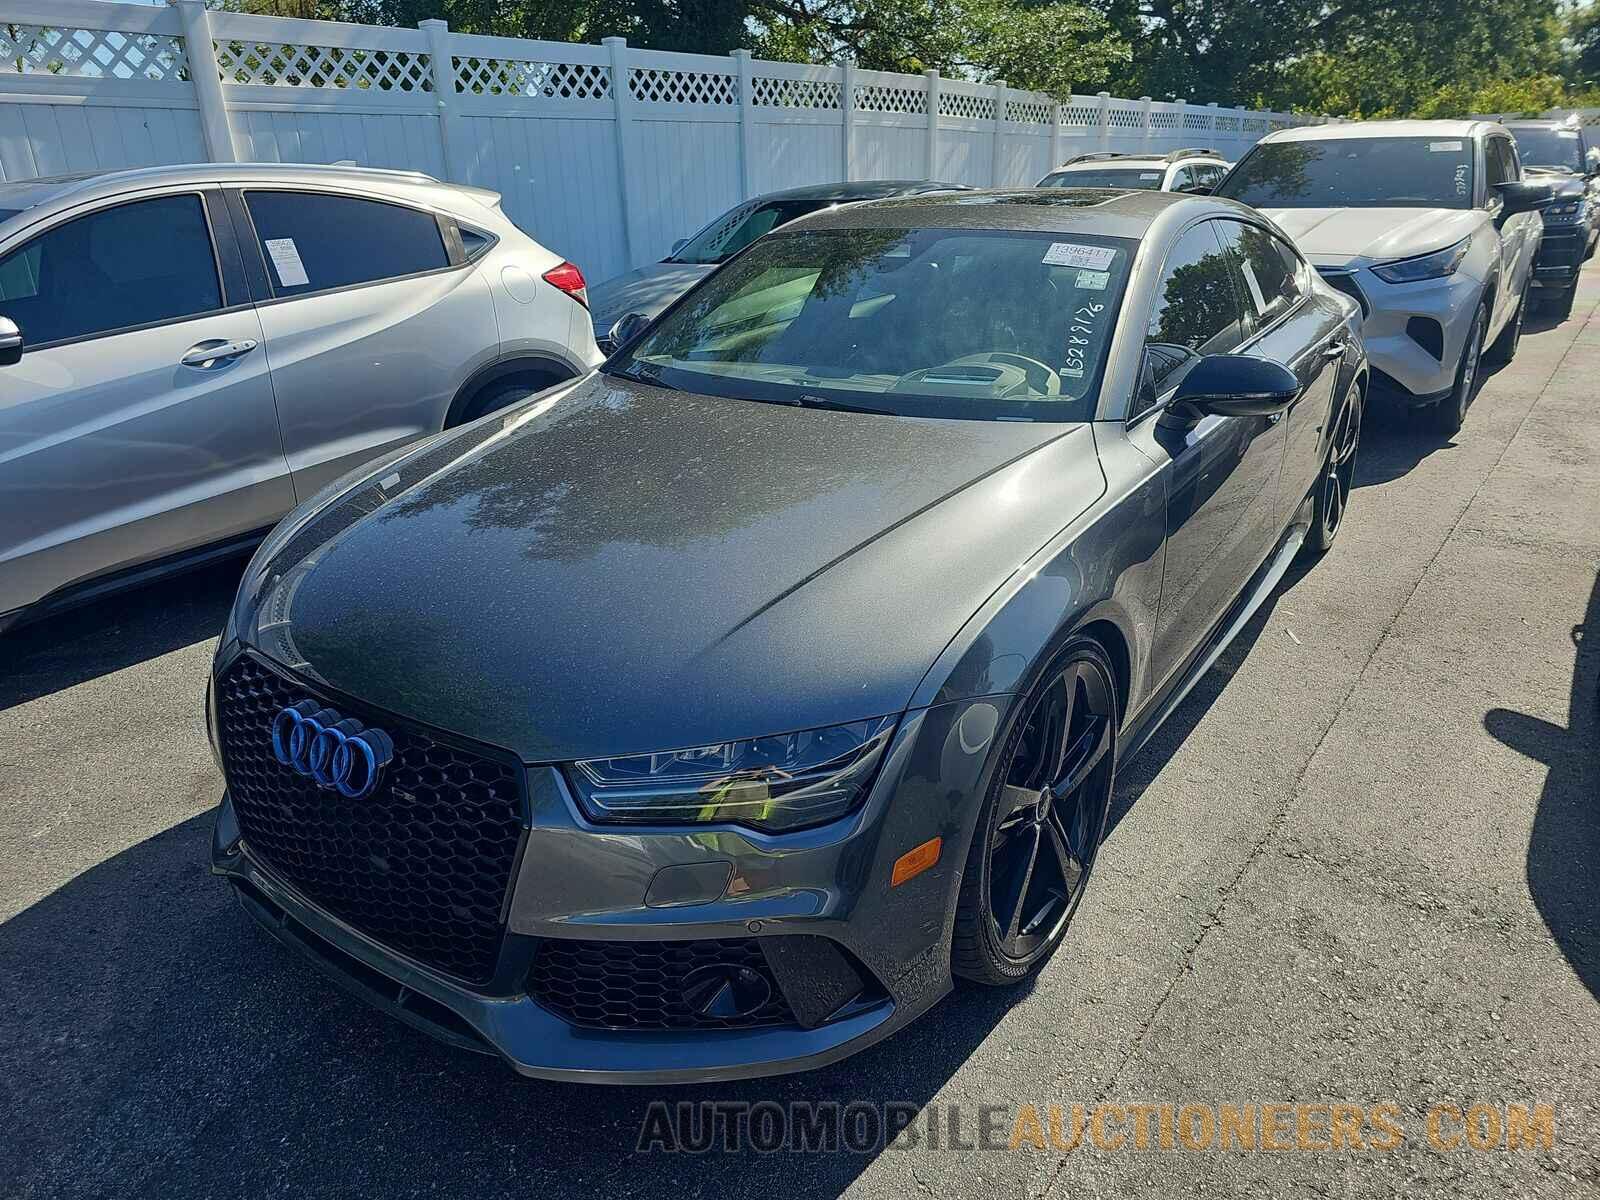 WUAW2AFCXGN902912 Audi RS 7 2016